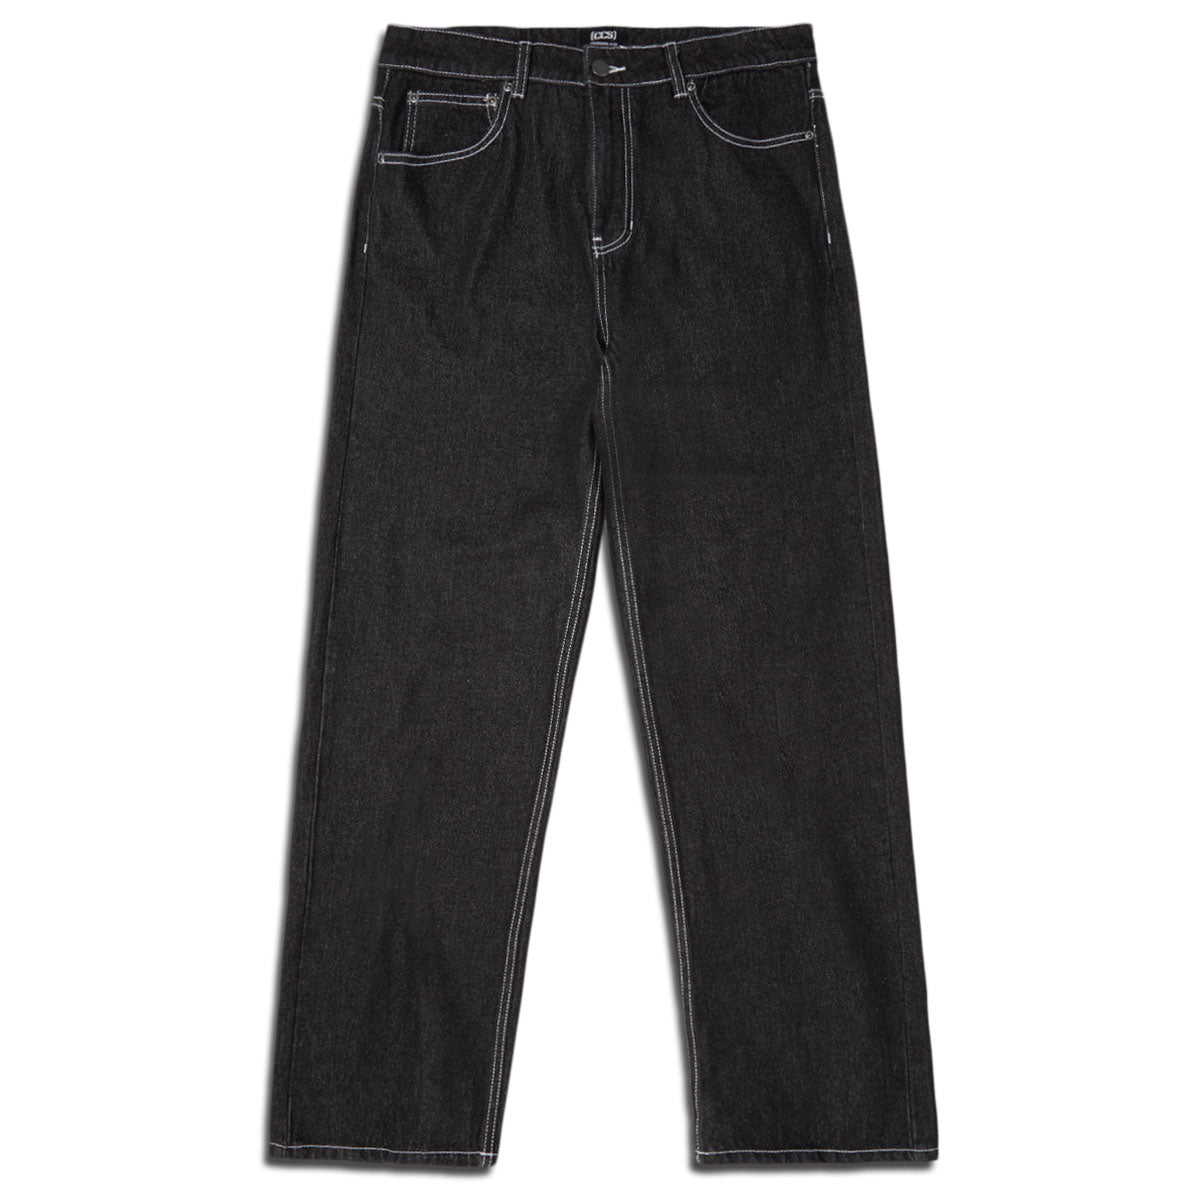 CCS Original Relaxed Denim Jeans Overdyed Black